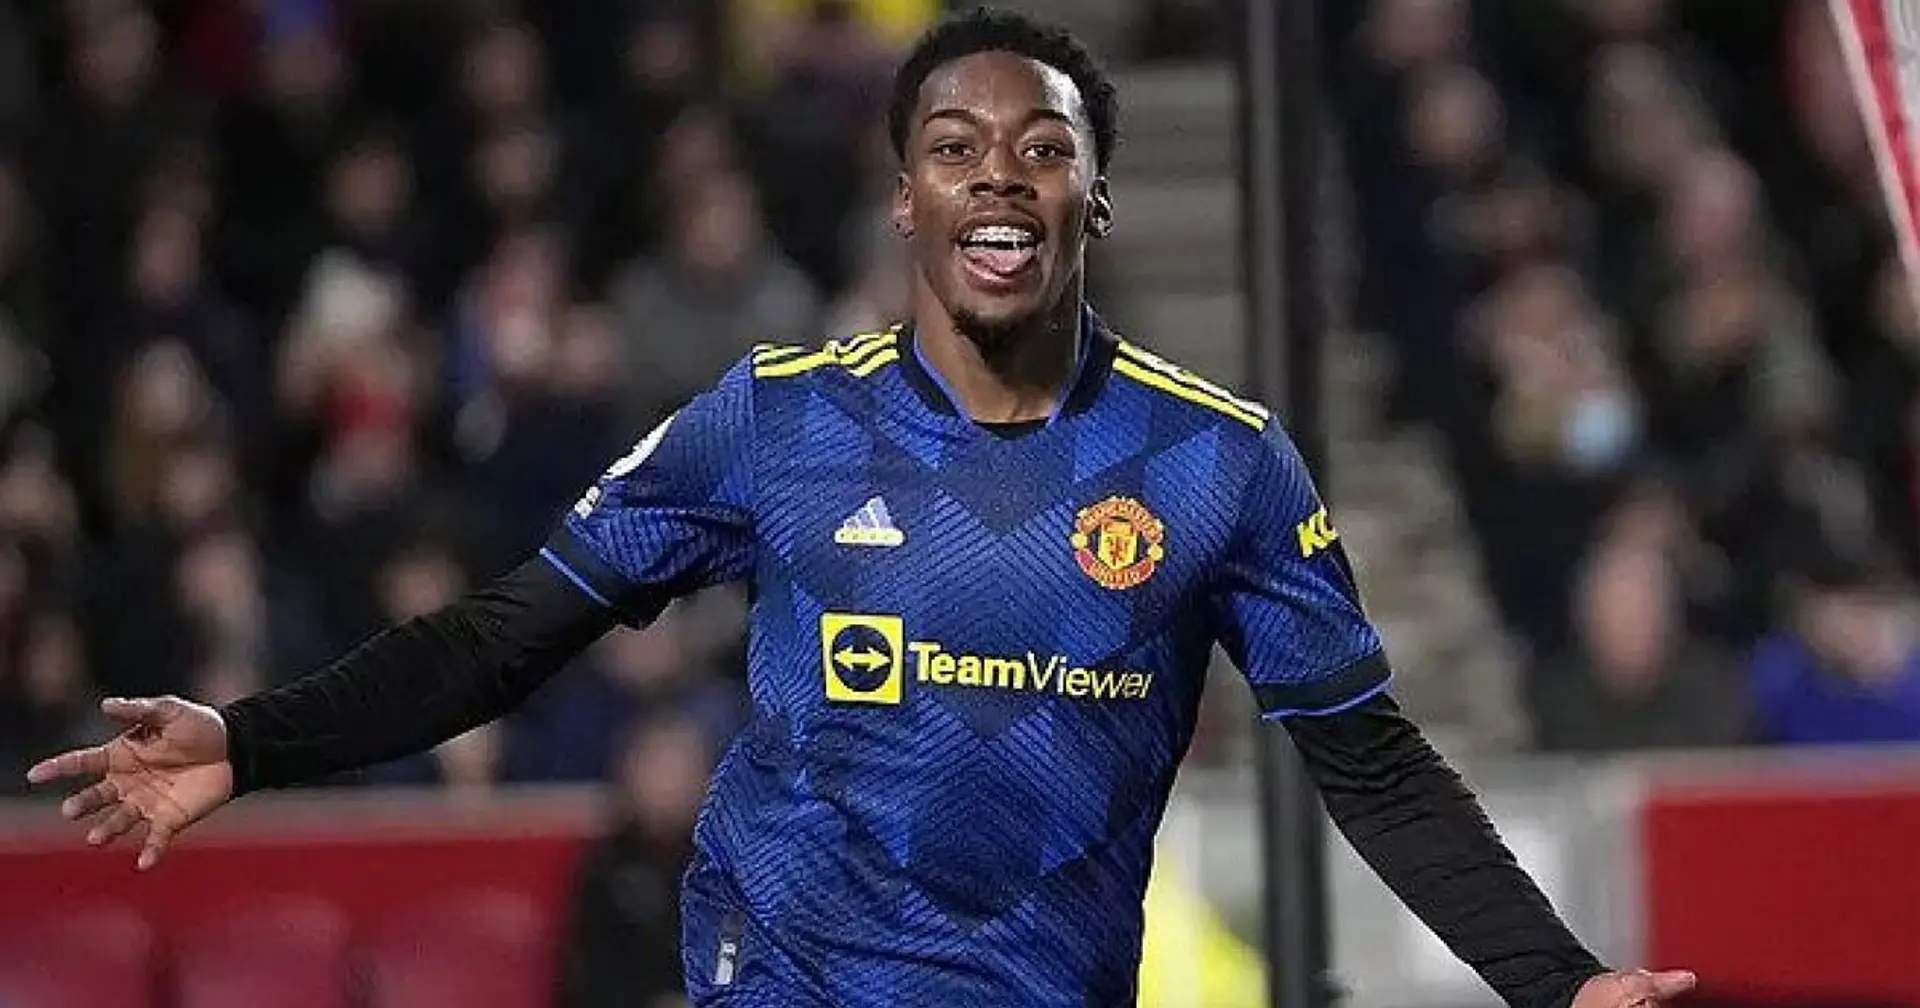 First Sweden call-up for Elanga & 4 more big Man United stories you might've missed